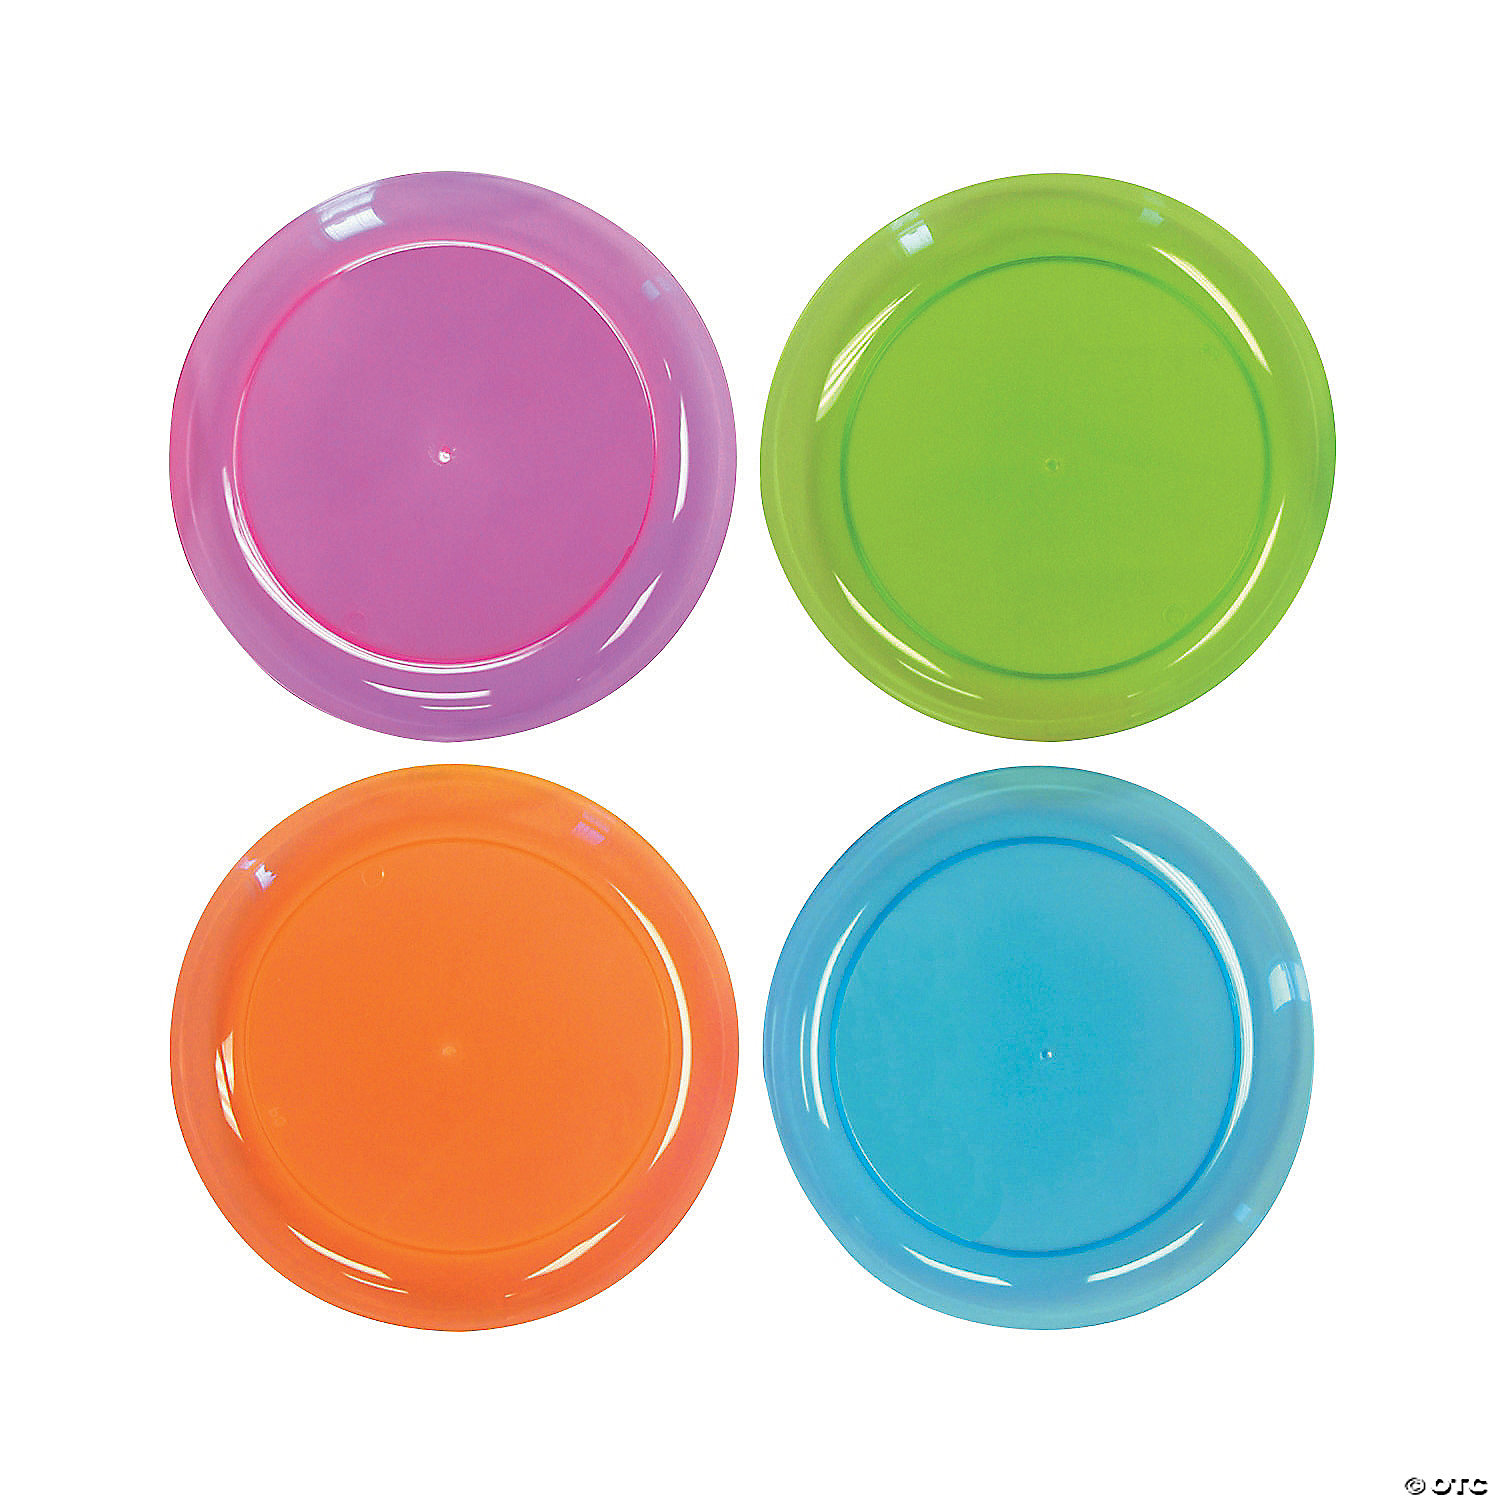 Tiger Chef Neon Assorted Party Plates 8-Pack 6-inch Hard Plastic Plates Assorted Neon Colors Pink Green and Orange Blue 